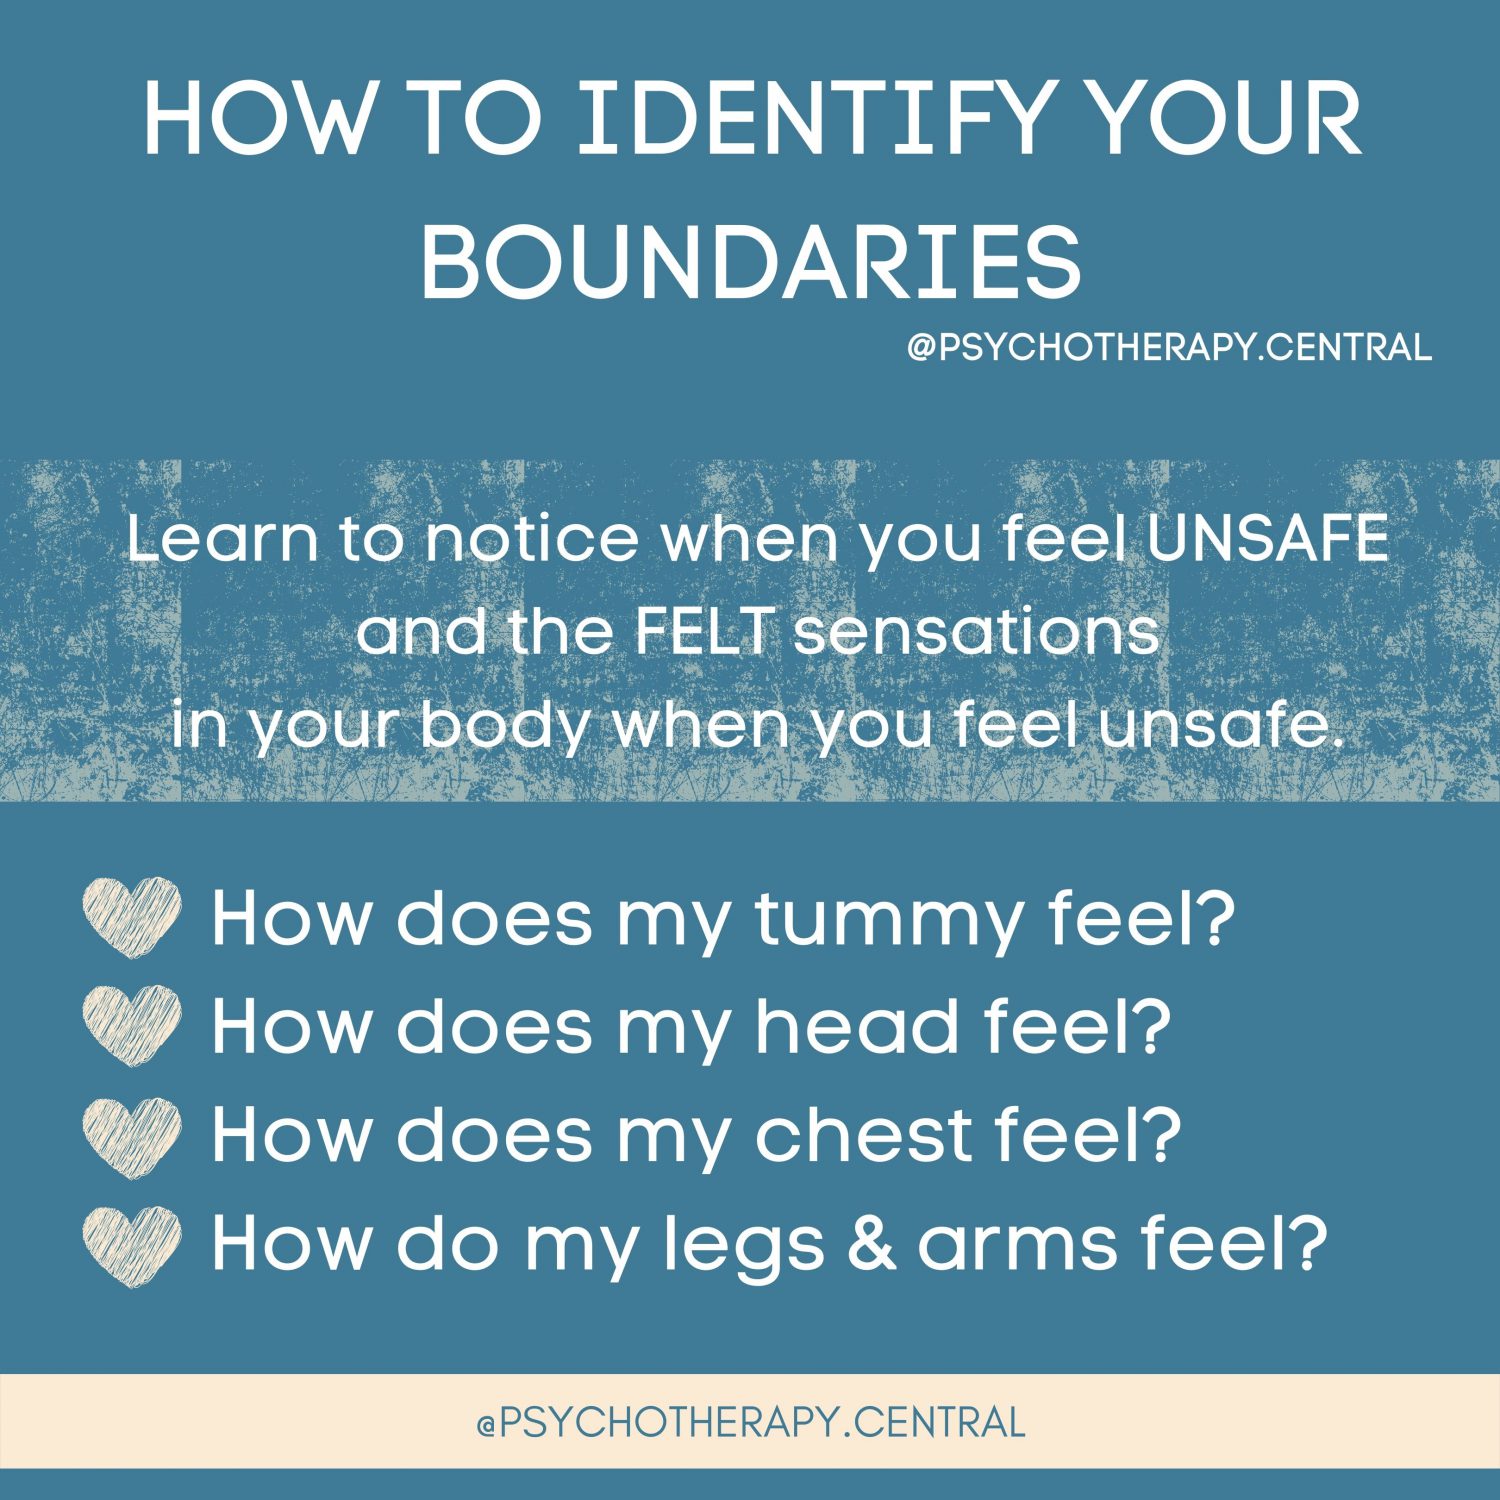 How to Identify Your Boundaries